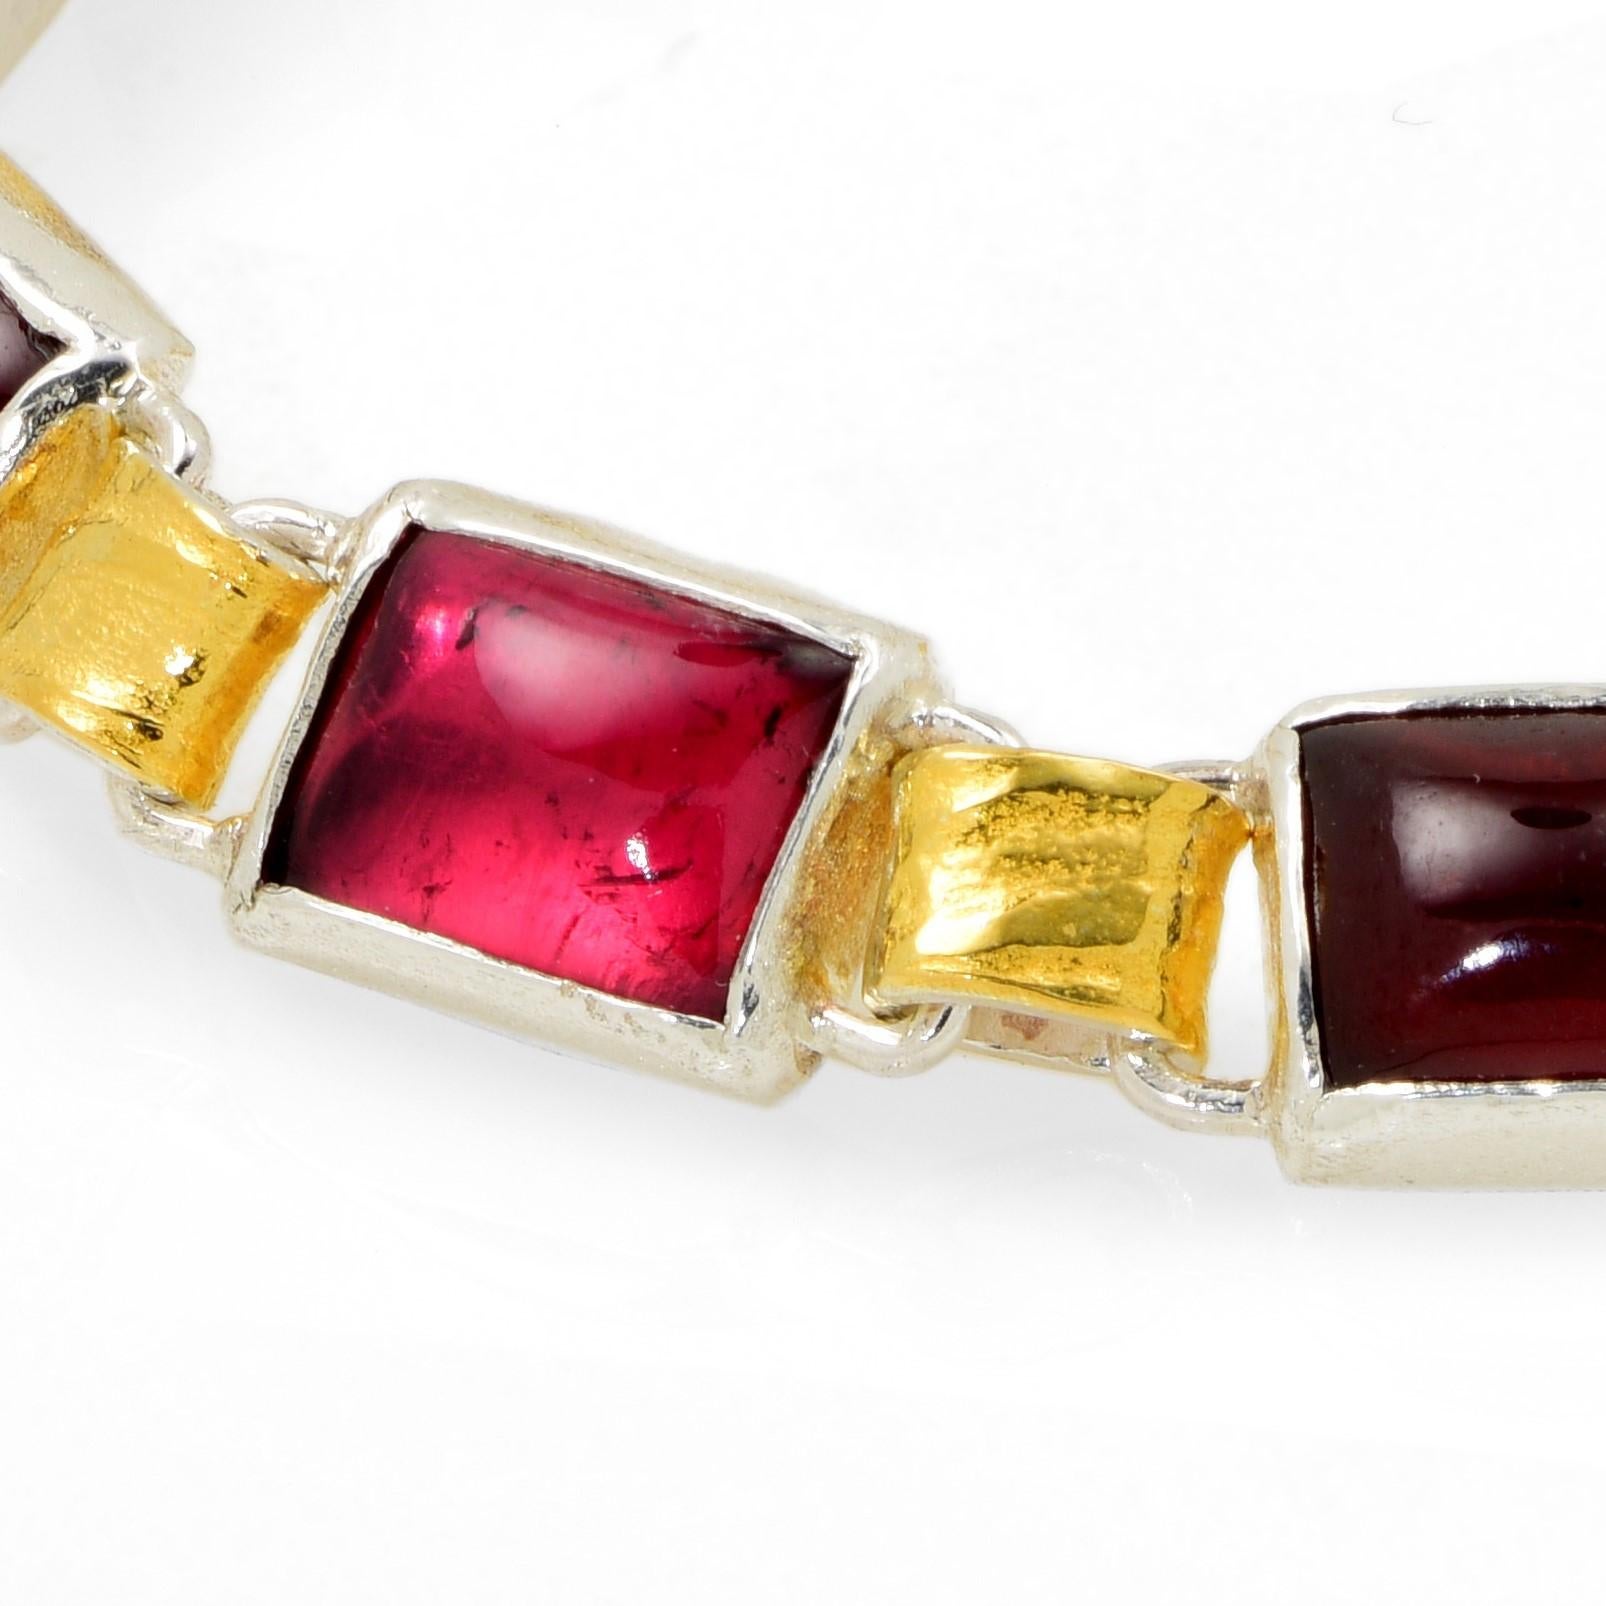 Cabochon Garnet and Tourmaline Link Bracelet in 22 Karat Yellow Gold and Silver